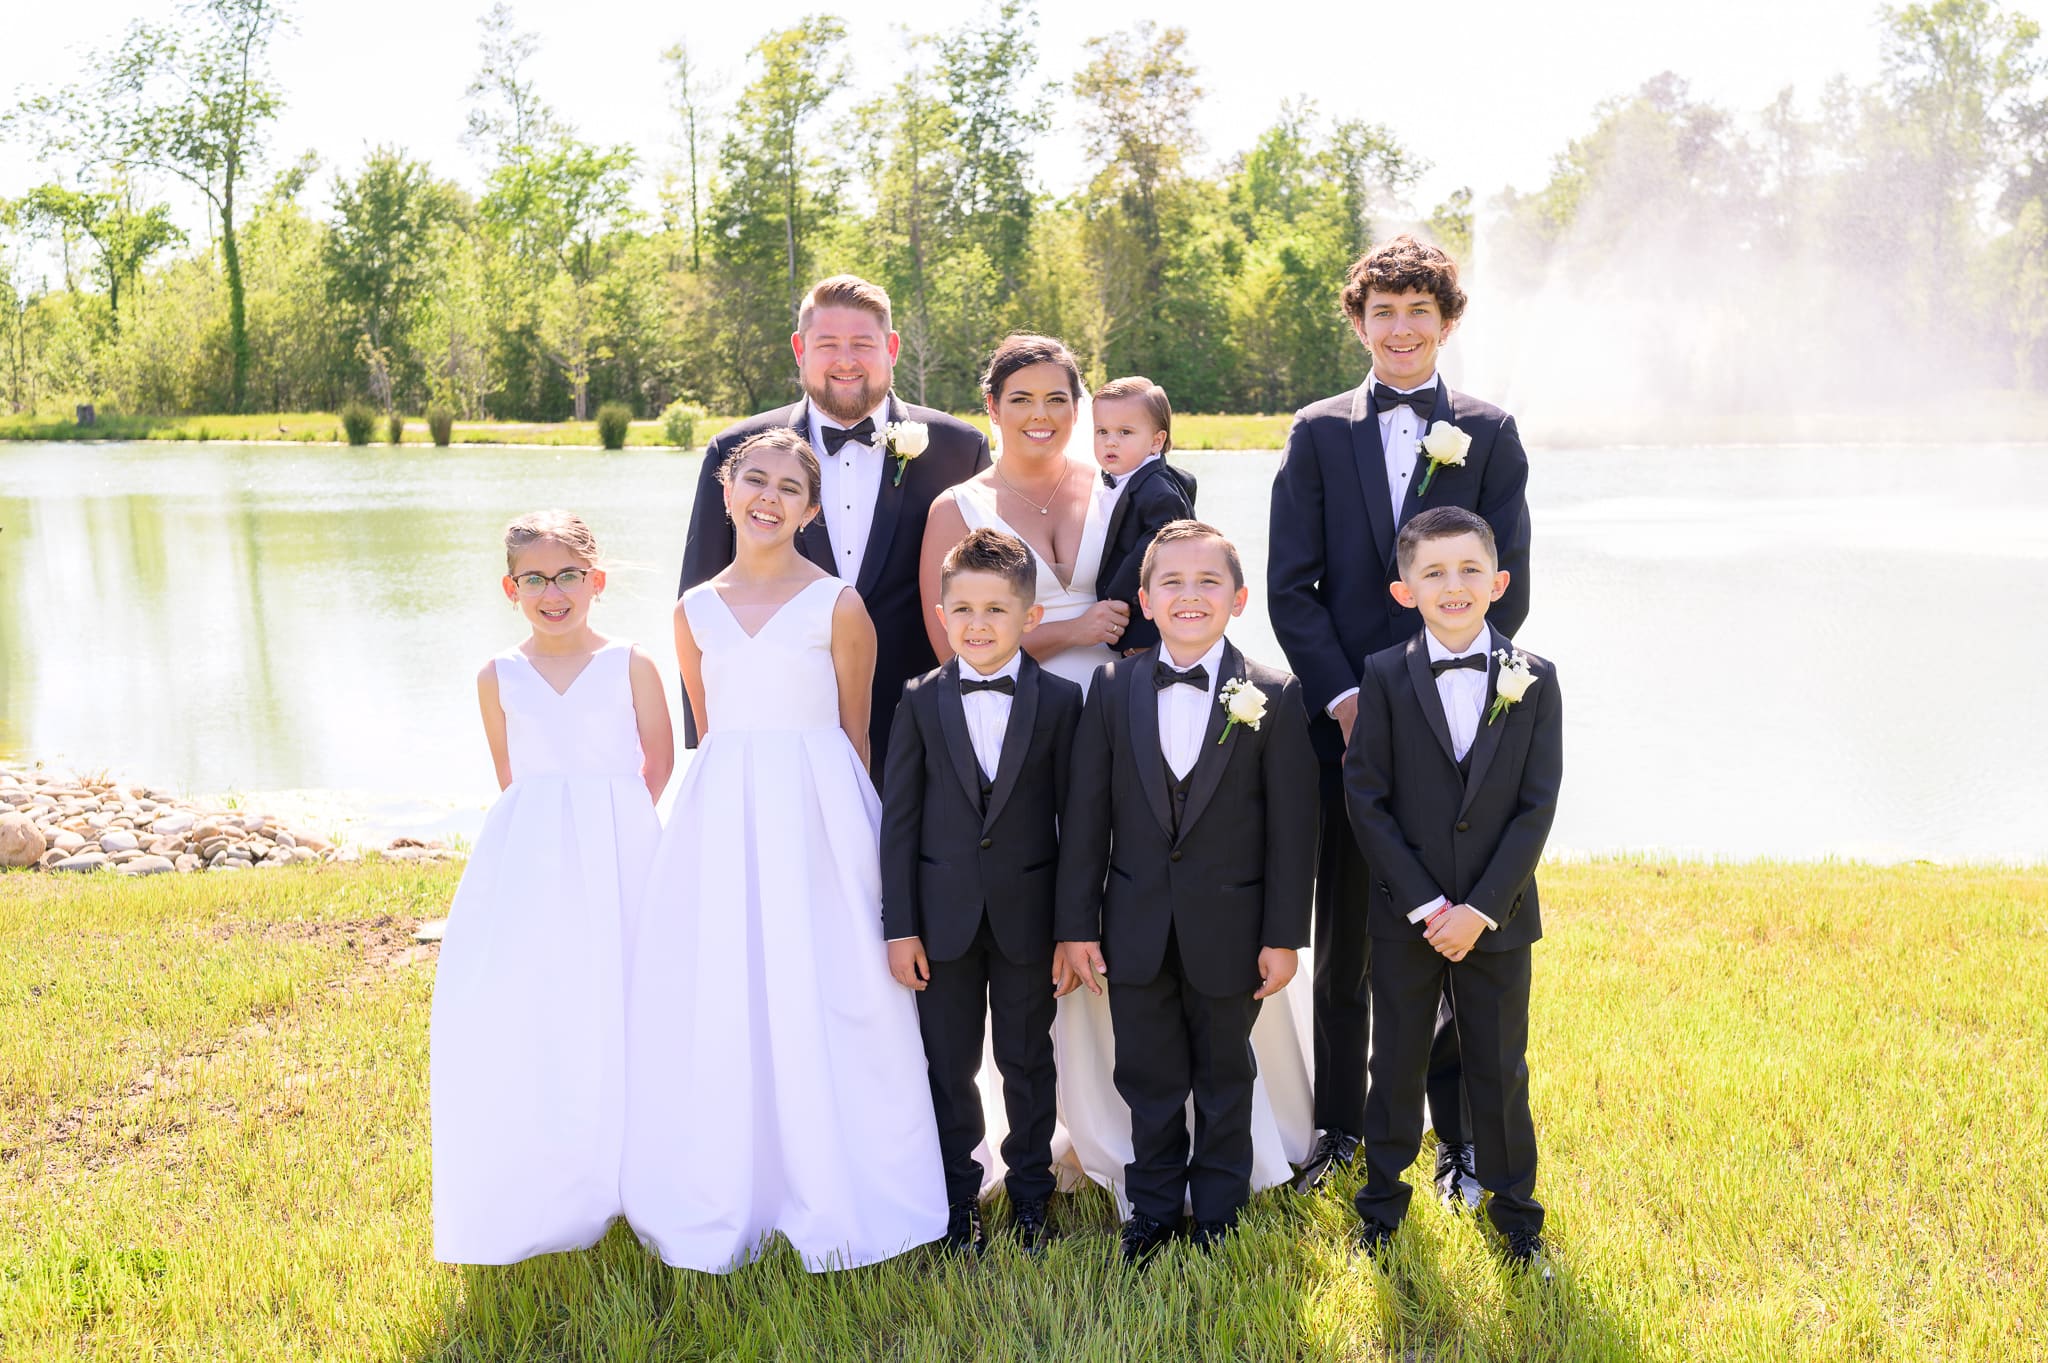 Bride and groom with kids - The Venue at White Oaks Farm